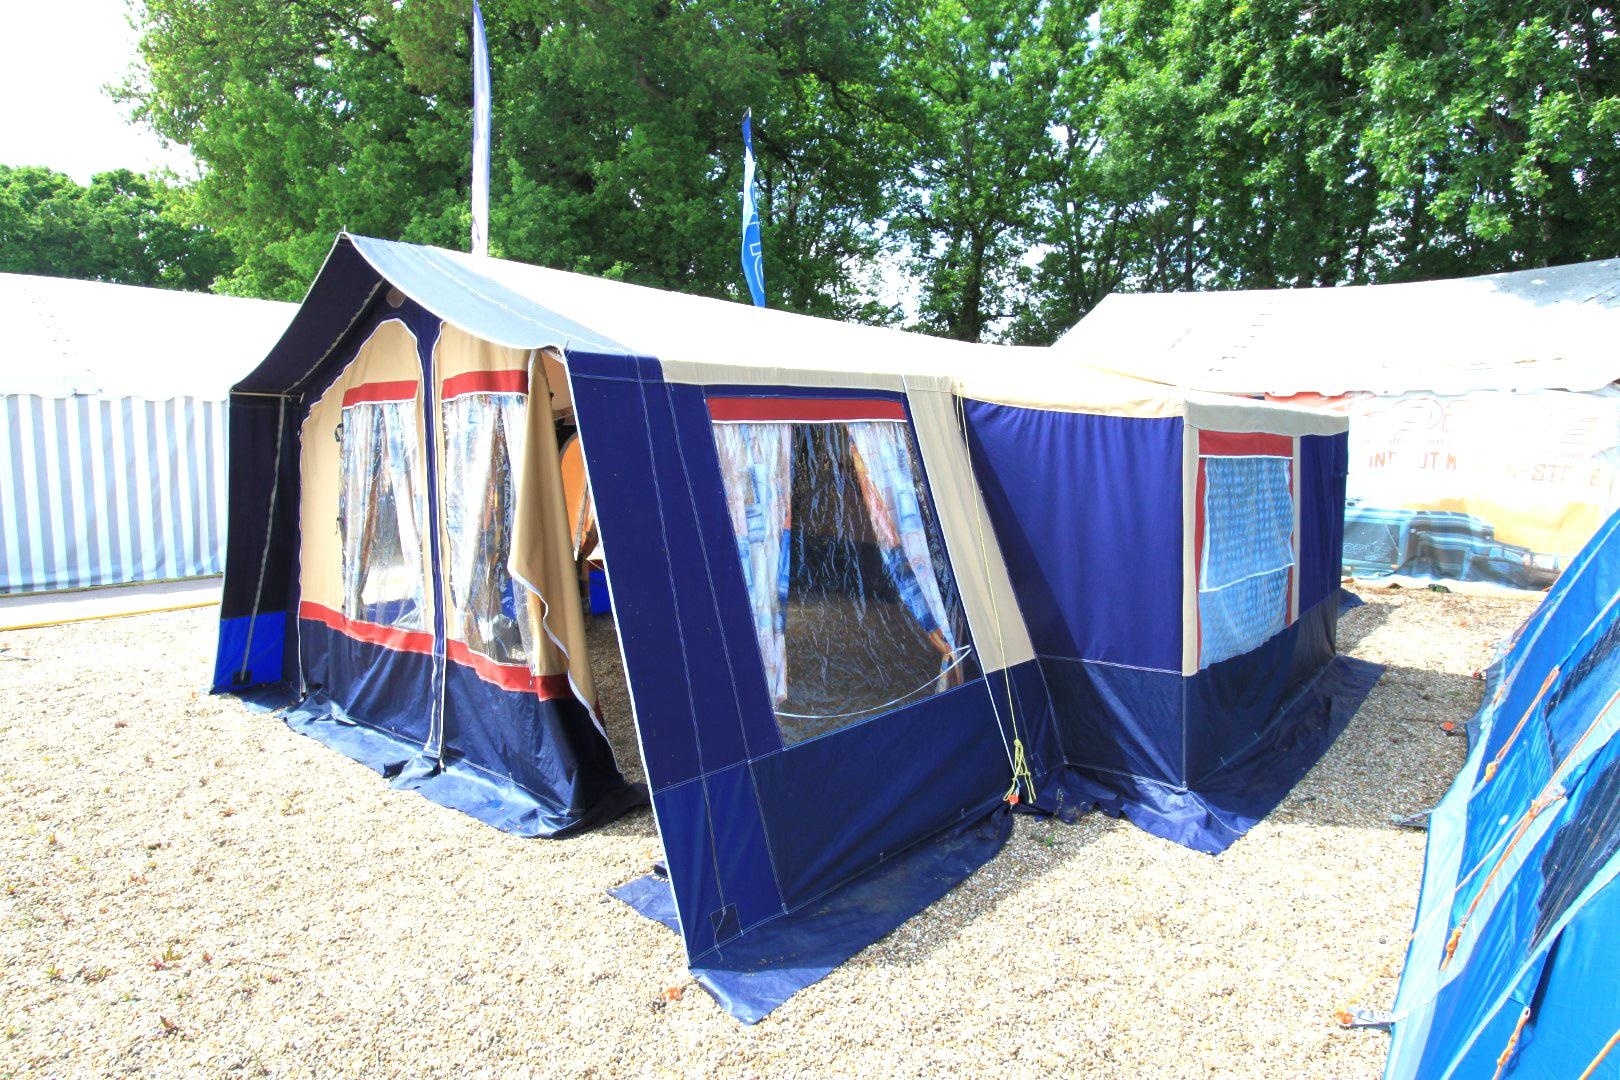 Taking Offers – Call 01202 893679 – Used – Campers & Leisure